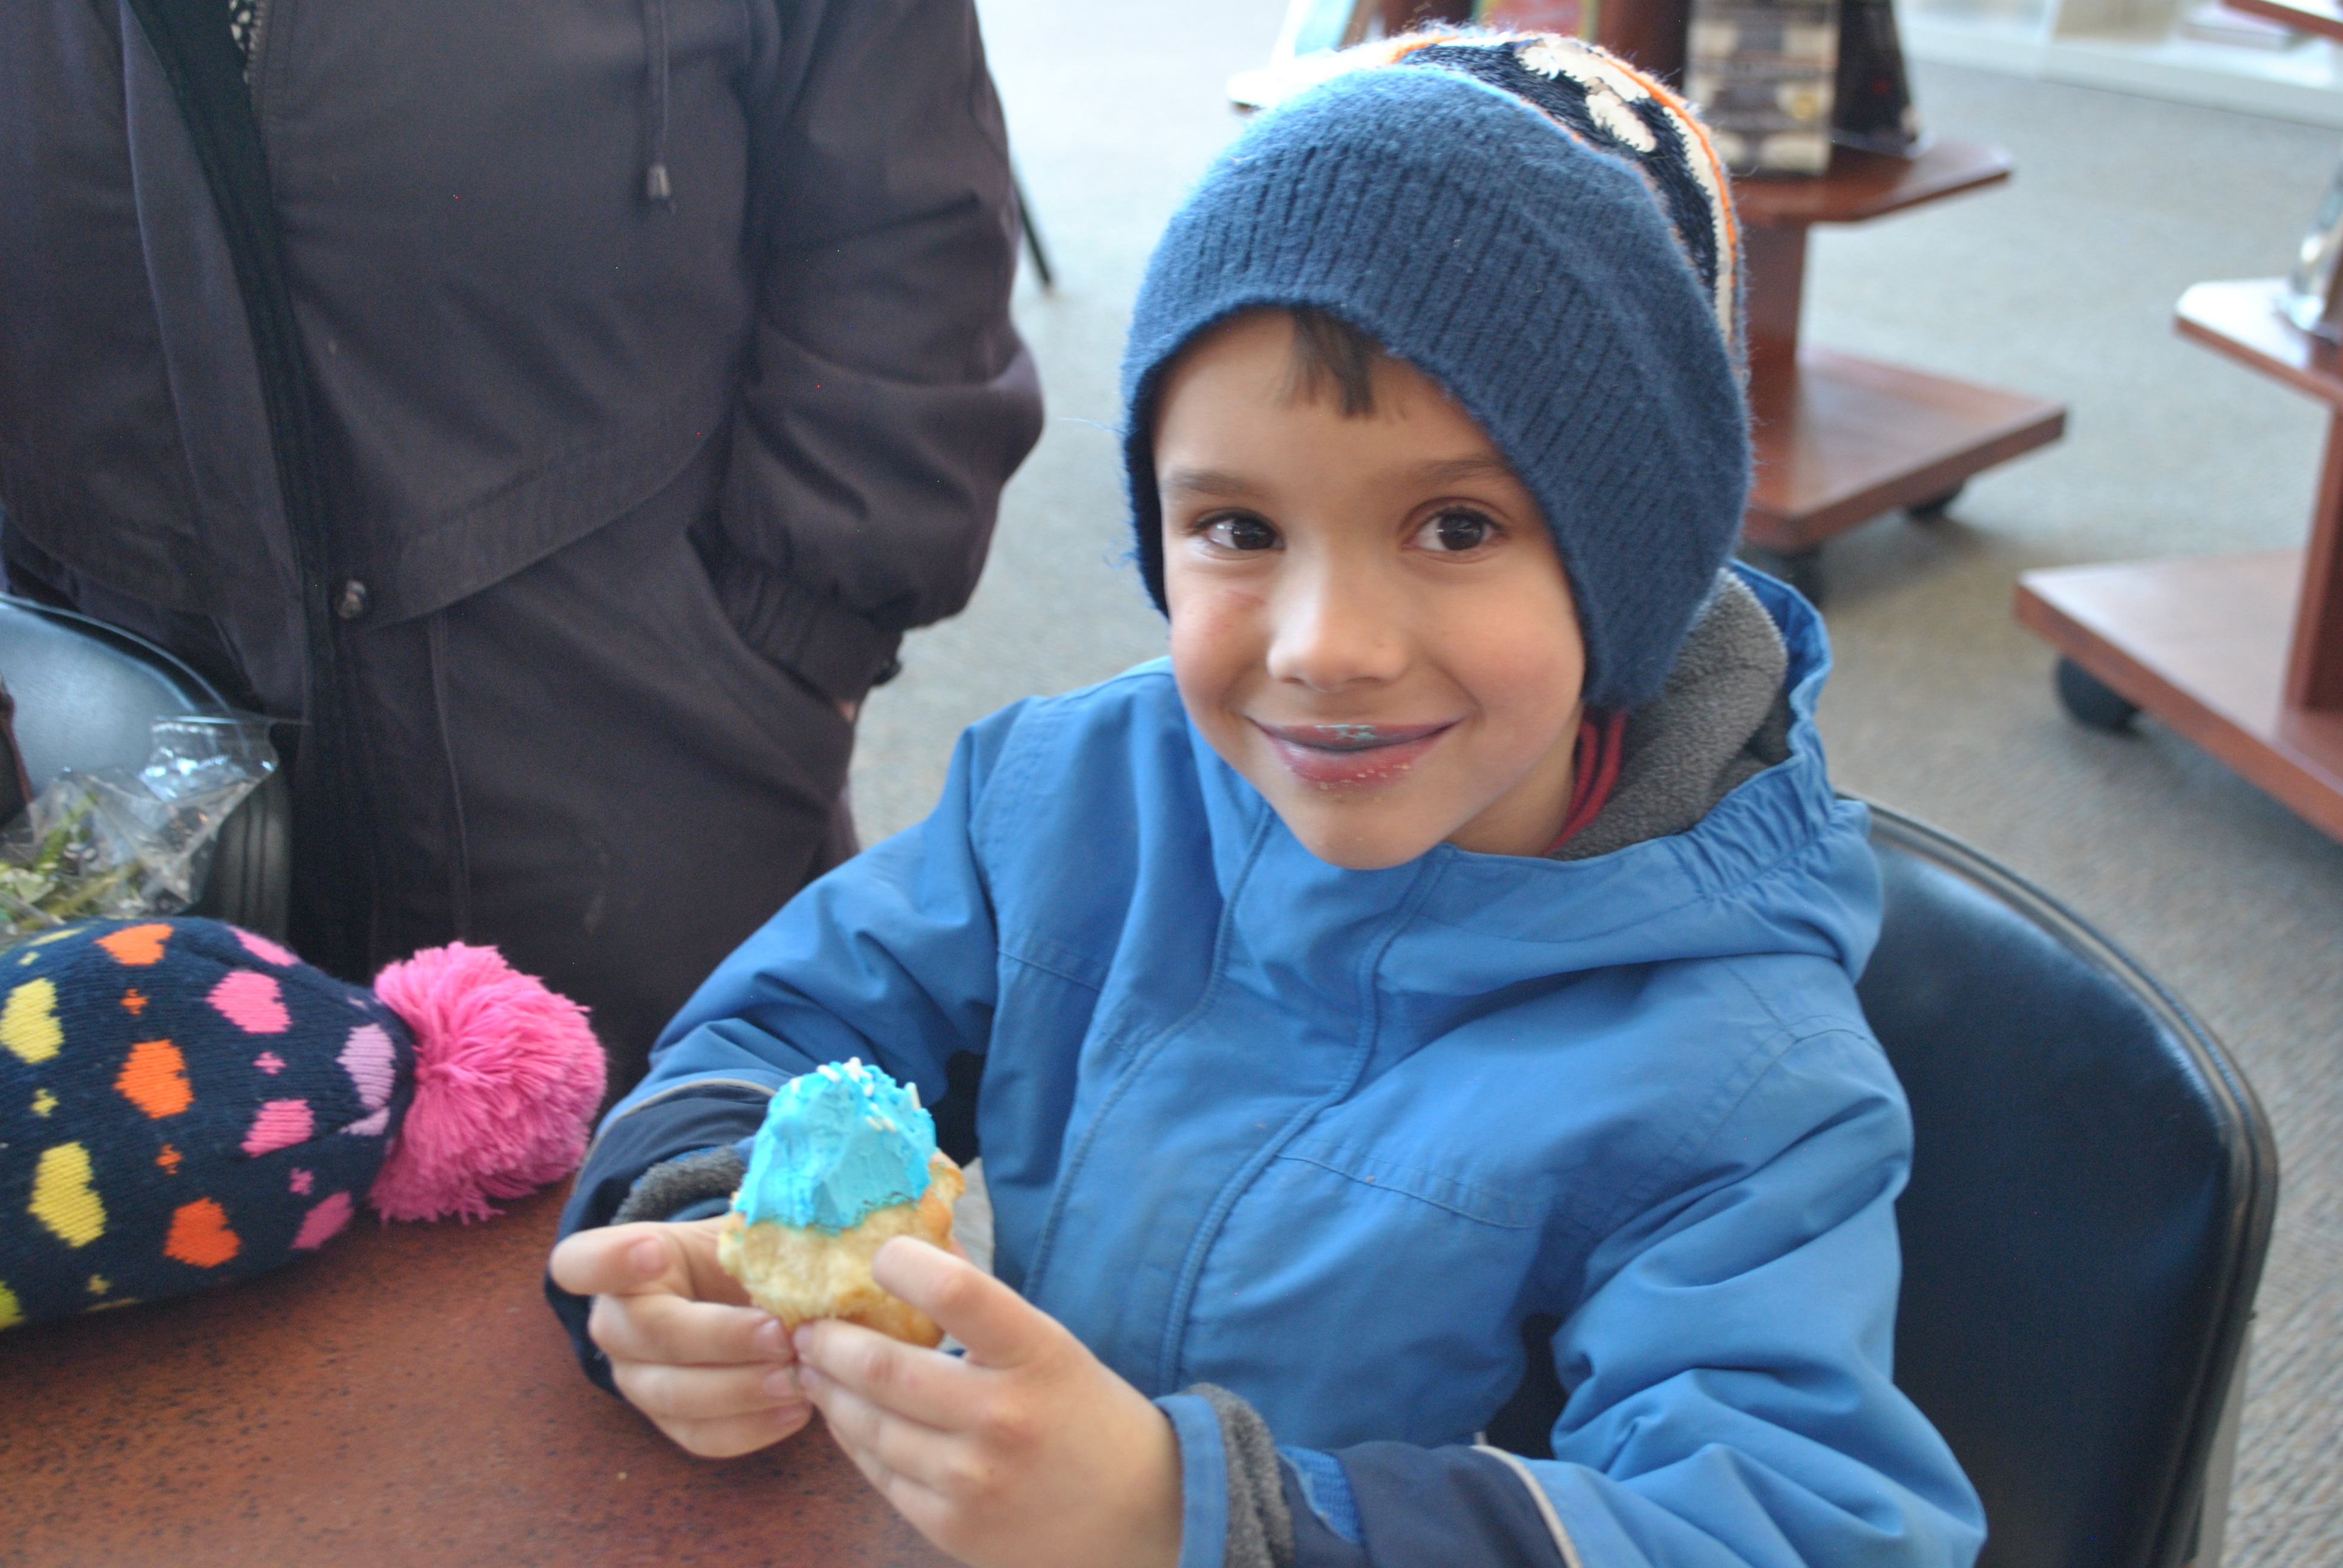 Child wearing blue coat and blue hat eats cupcake with blue icing